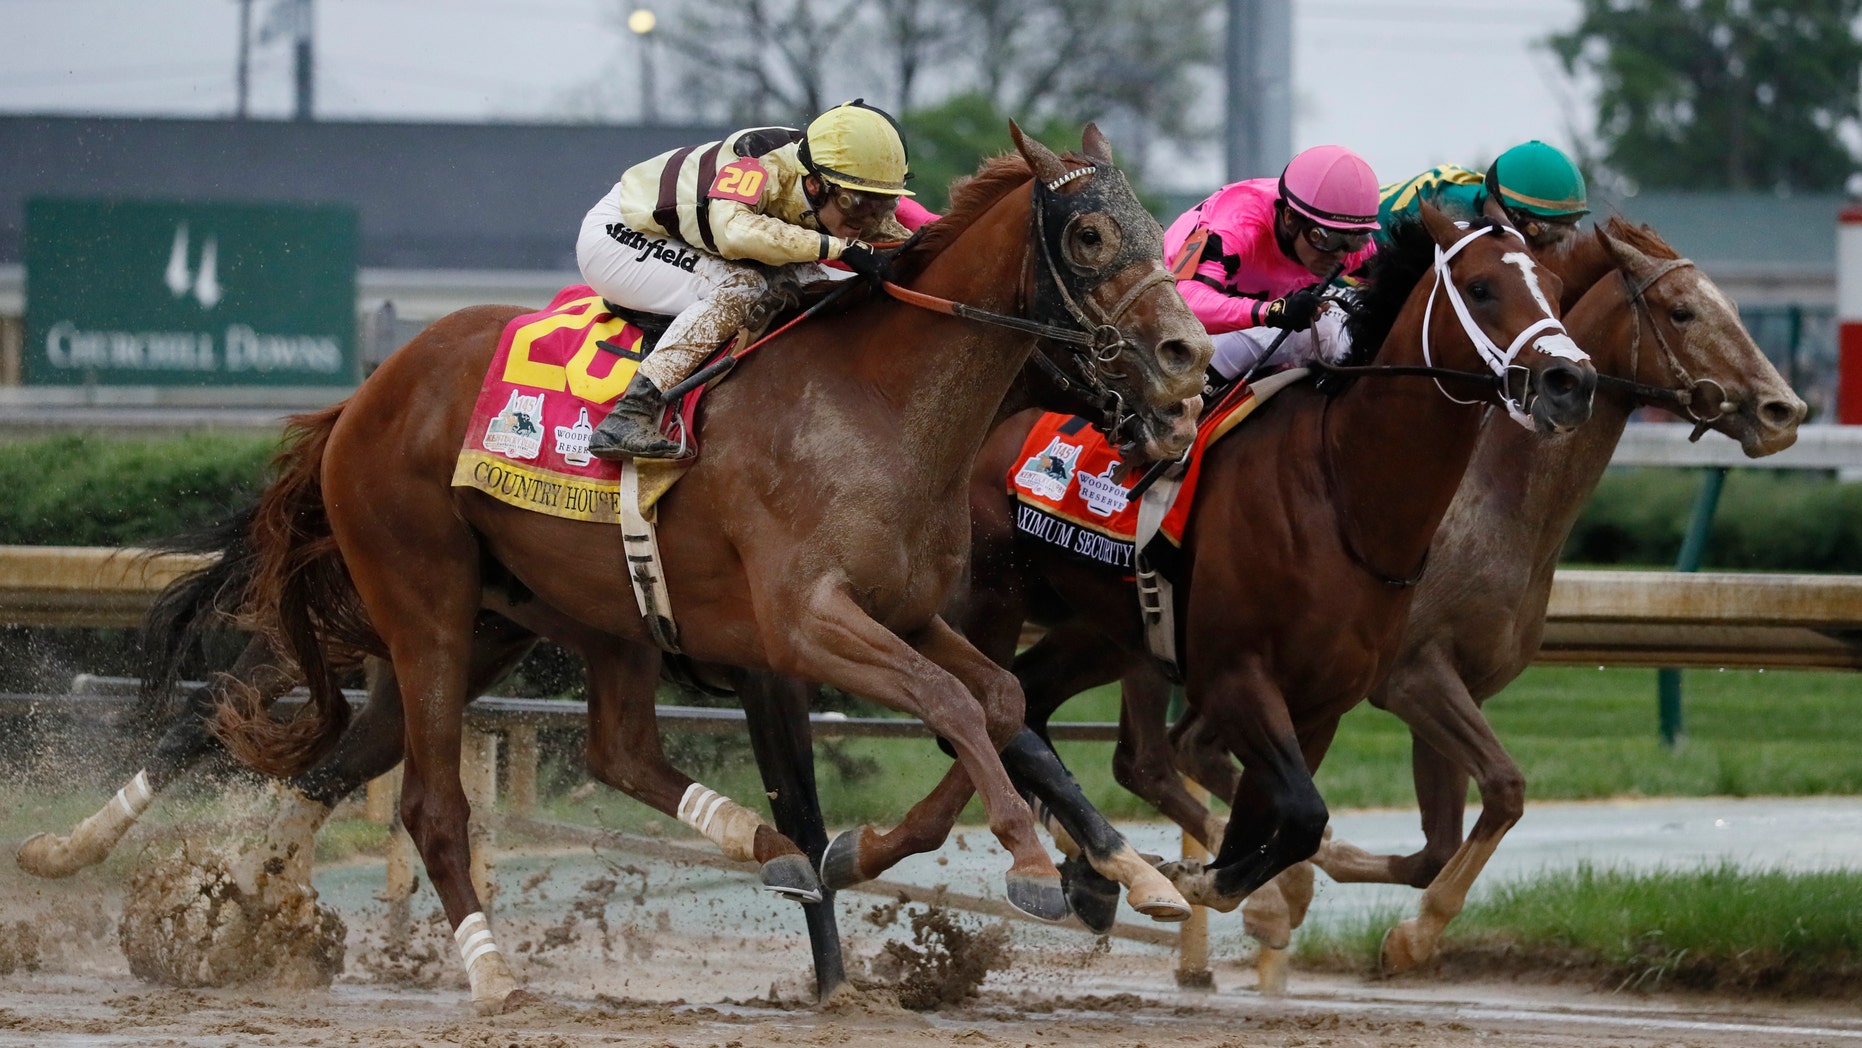 Luis Saez straddles maximum safety, center, to victory at the 145th edition of the Kentucky Derby horse race at Churchill Downs on Saturday, May 4, 2019, in Louisville, Kentucky.